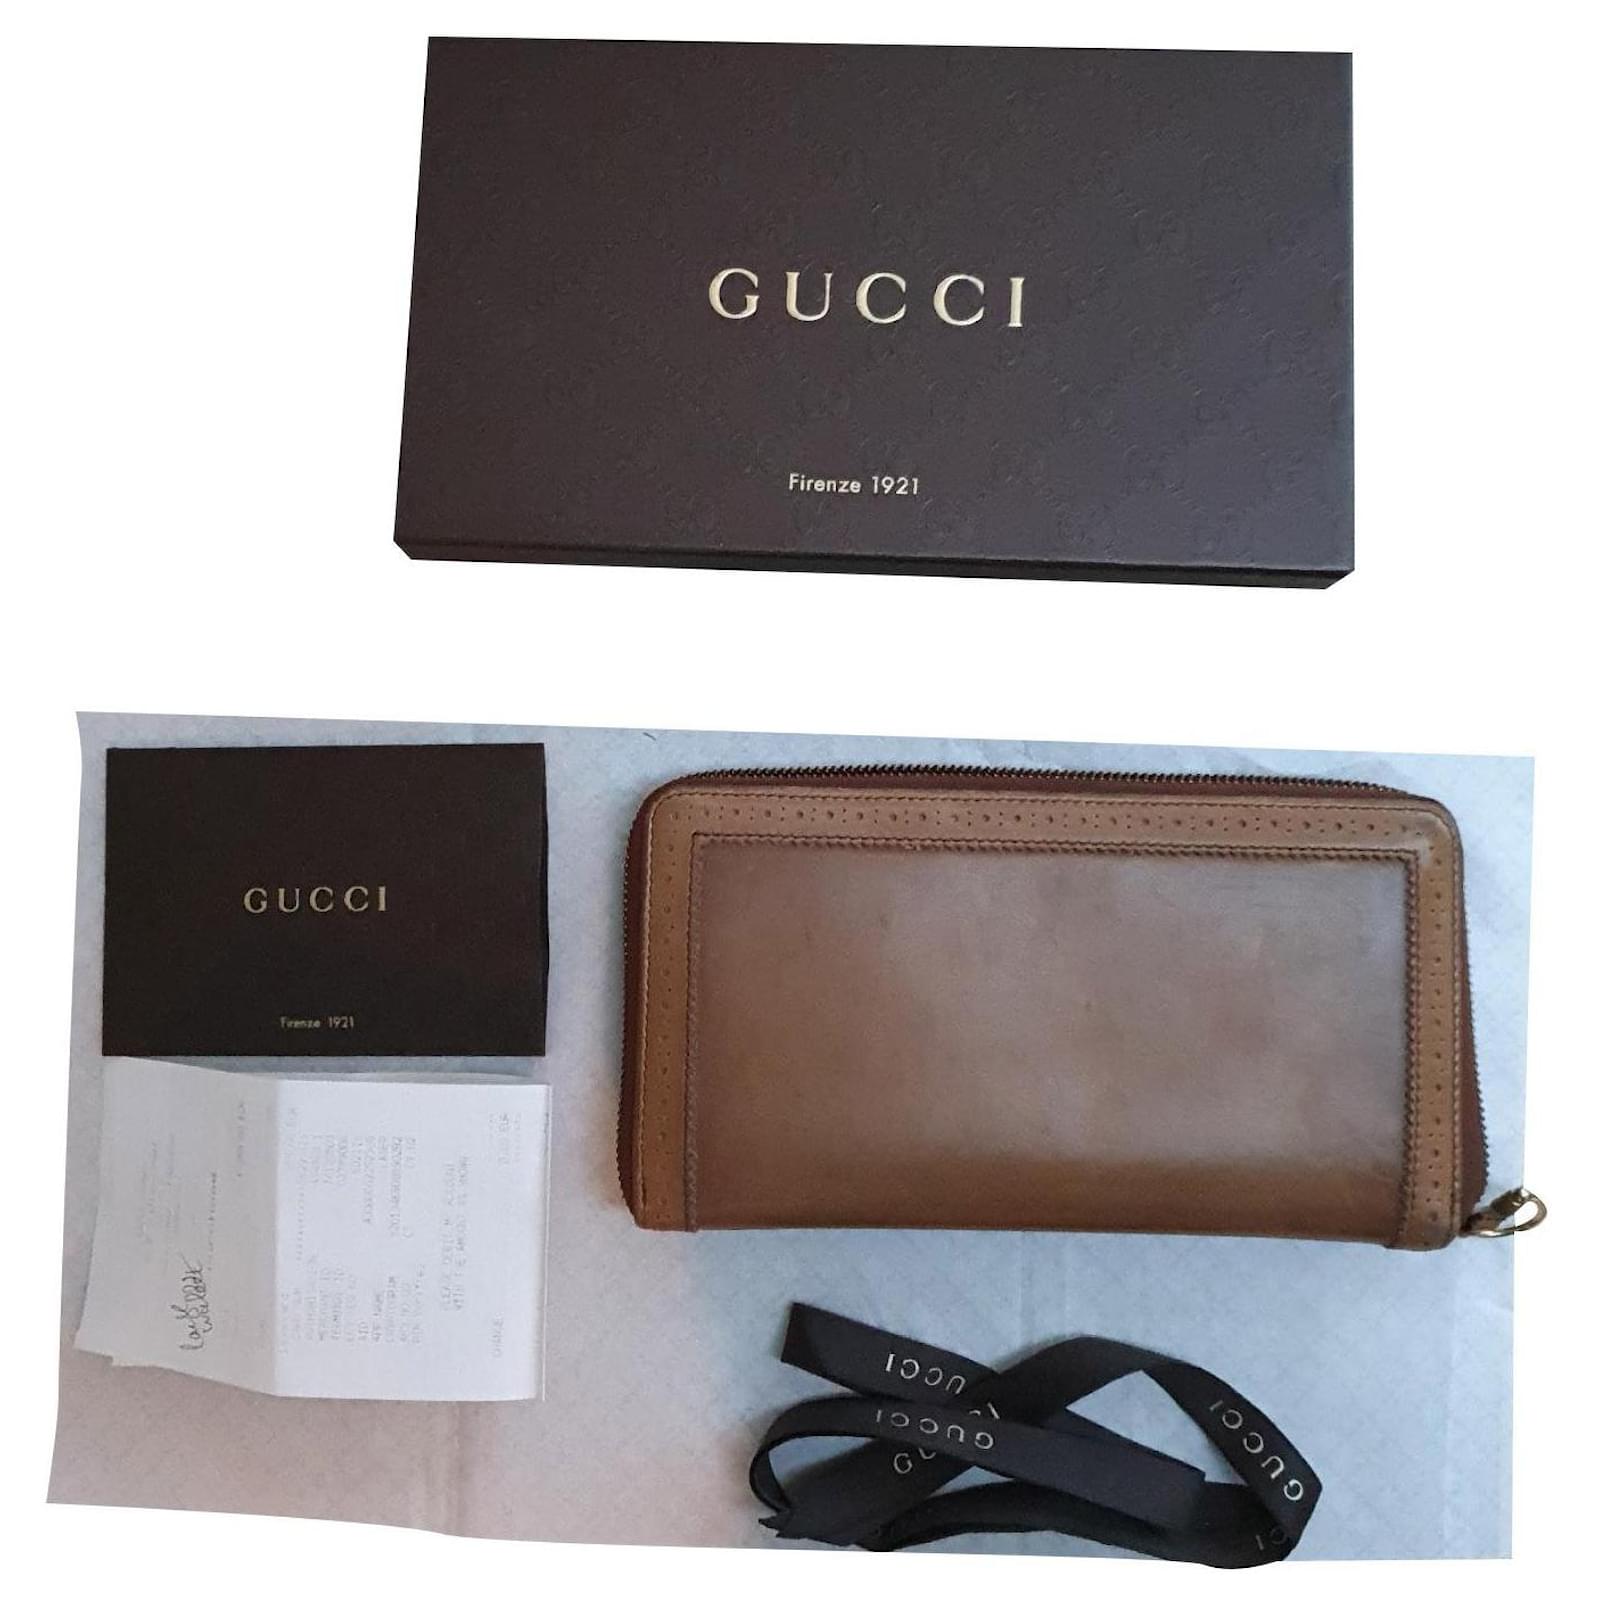 GUCCI Wallet JUMBO GG in camel/ brown